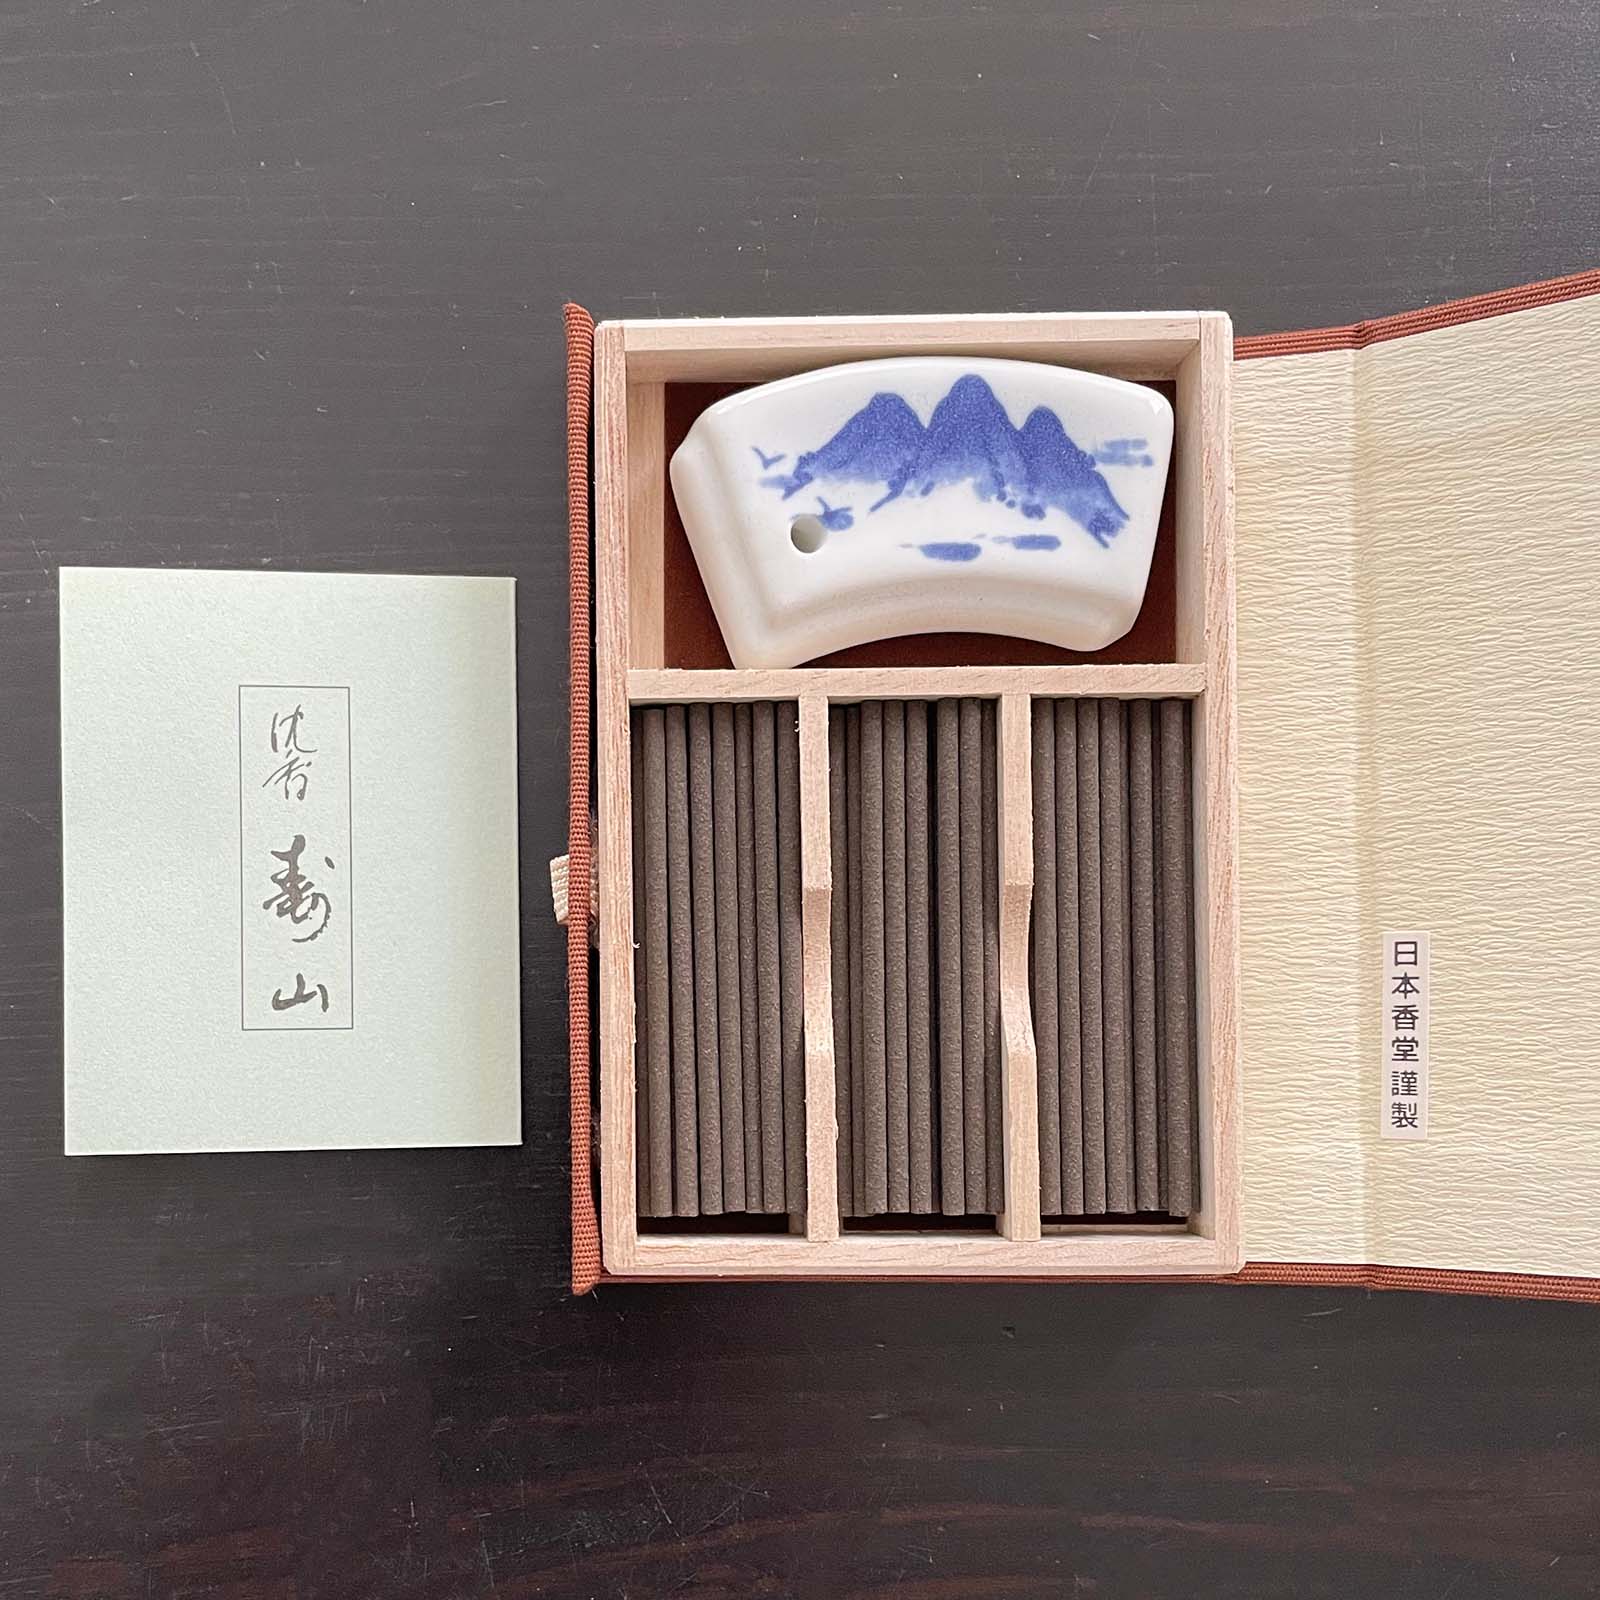 Jinkoh Juzan Incense_Lifestyle_Incense_Japanese Style_Traditional_1_2_3